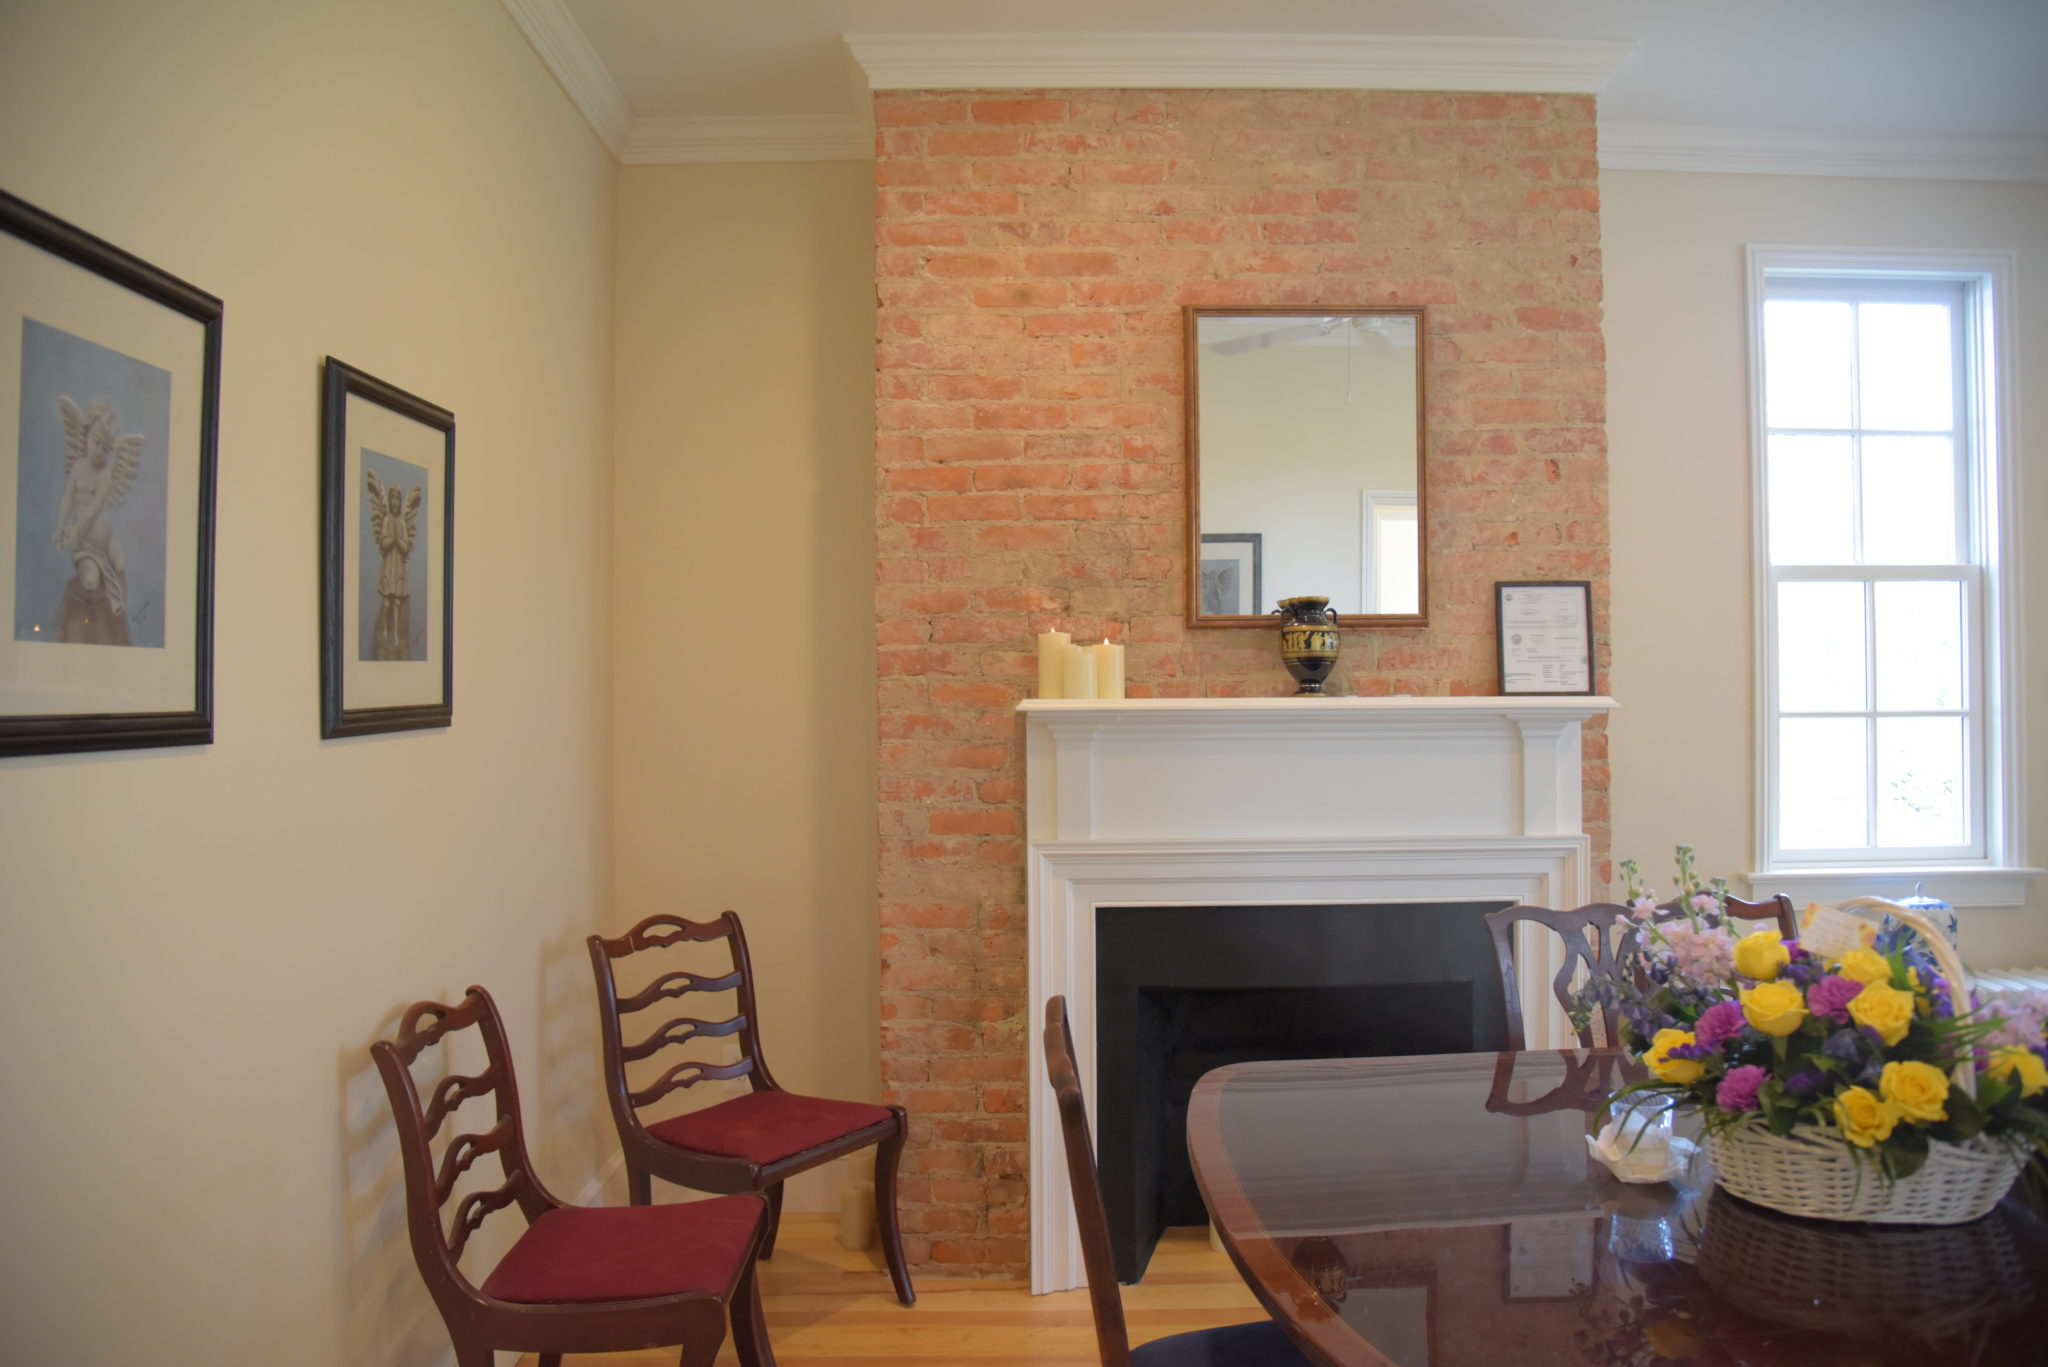 antique chairs next to a brick fireplace